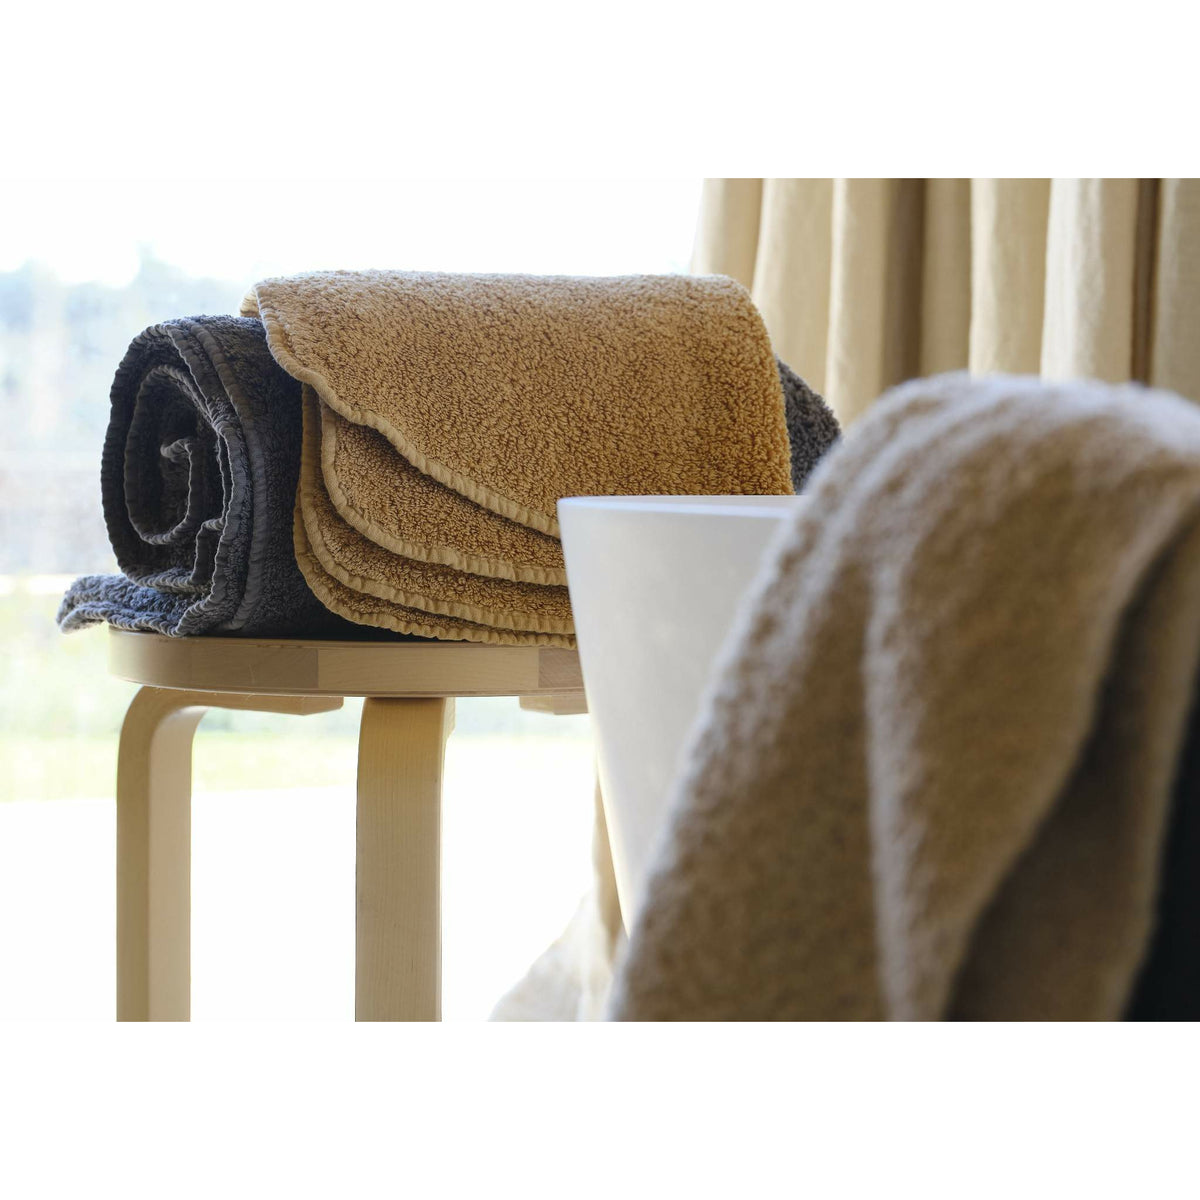 Buy Durable and Absorbent Arosa Bath Towels Online